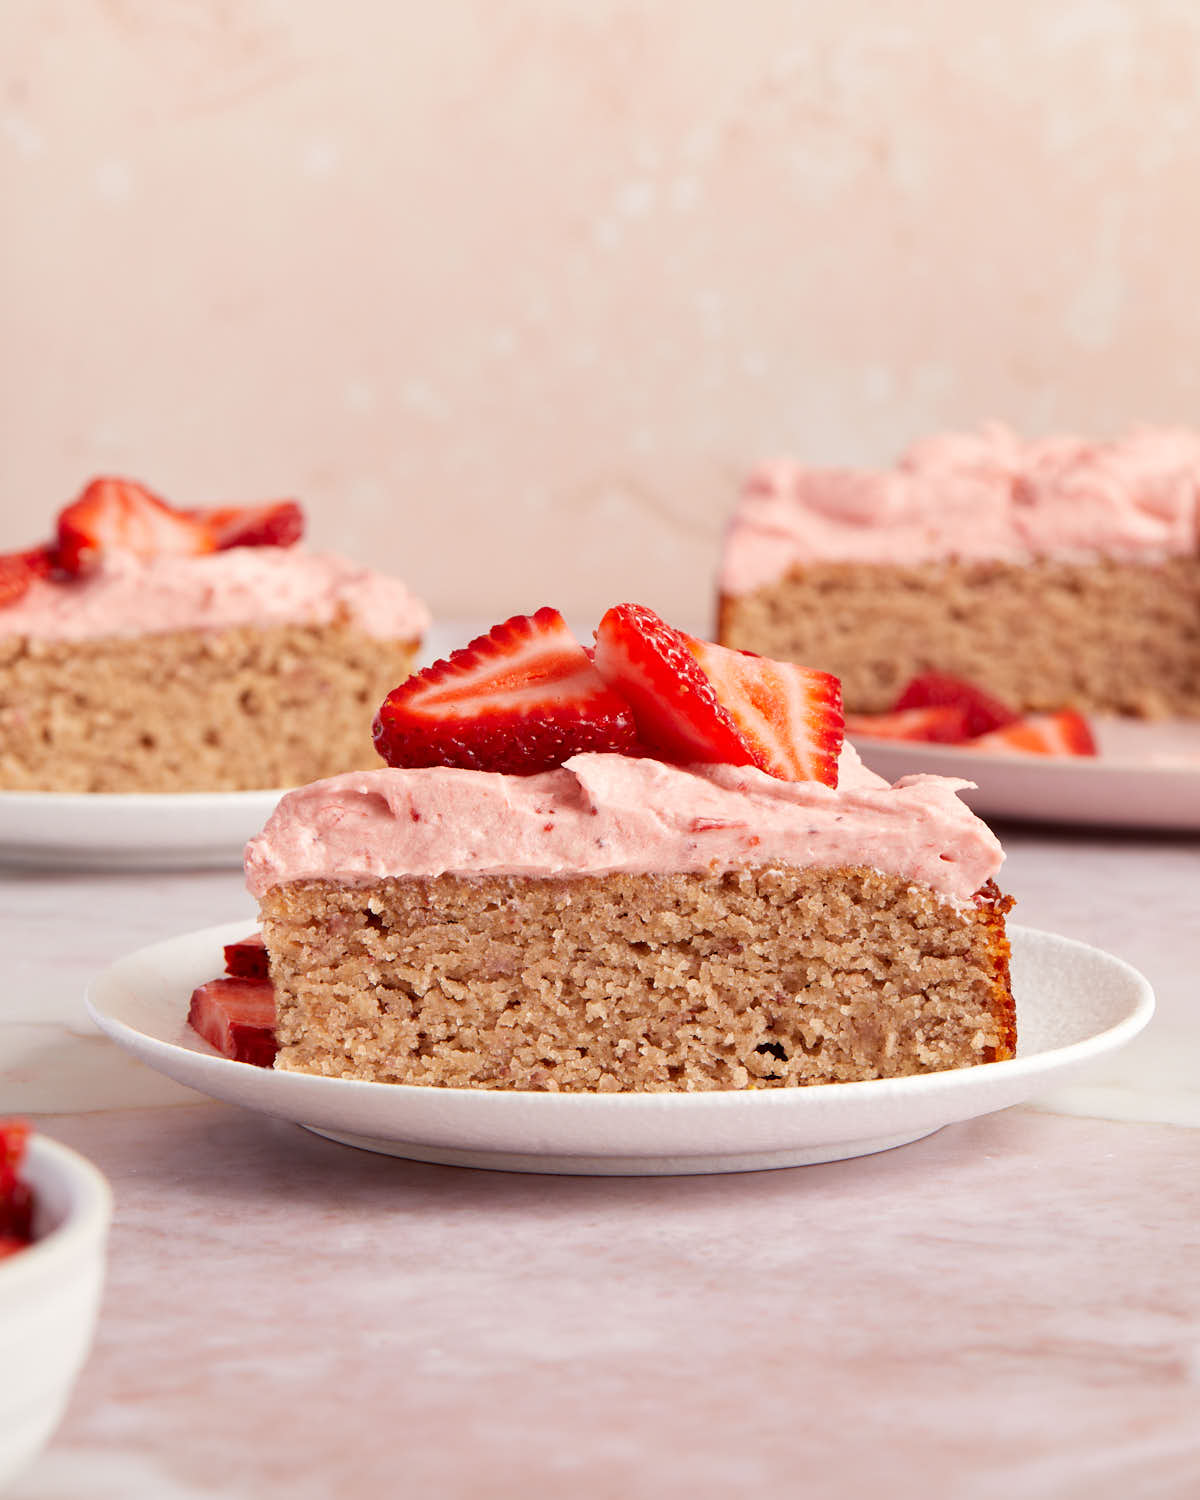 Side view of a slice of strawberry cake on a white plate and topped with fresh strawberries.